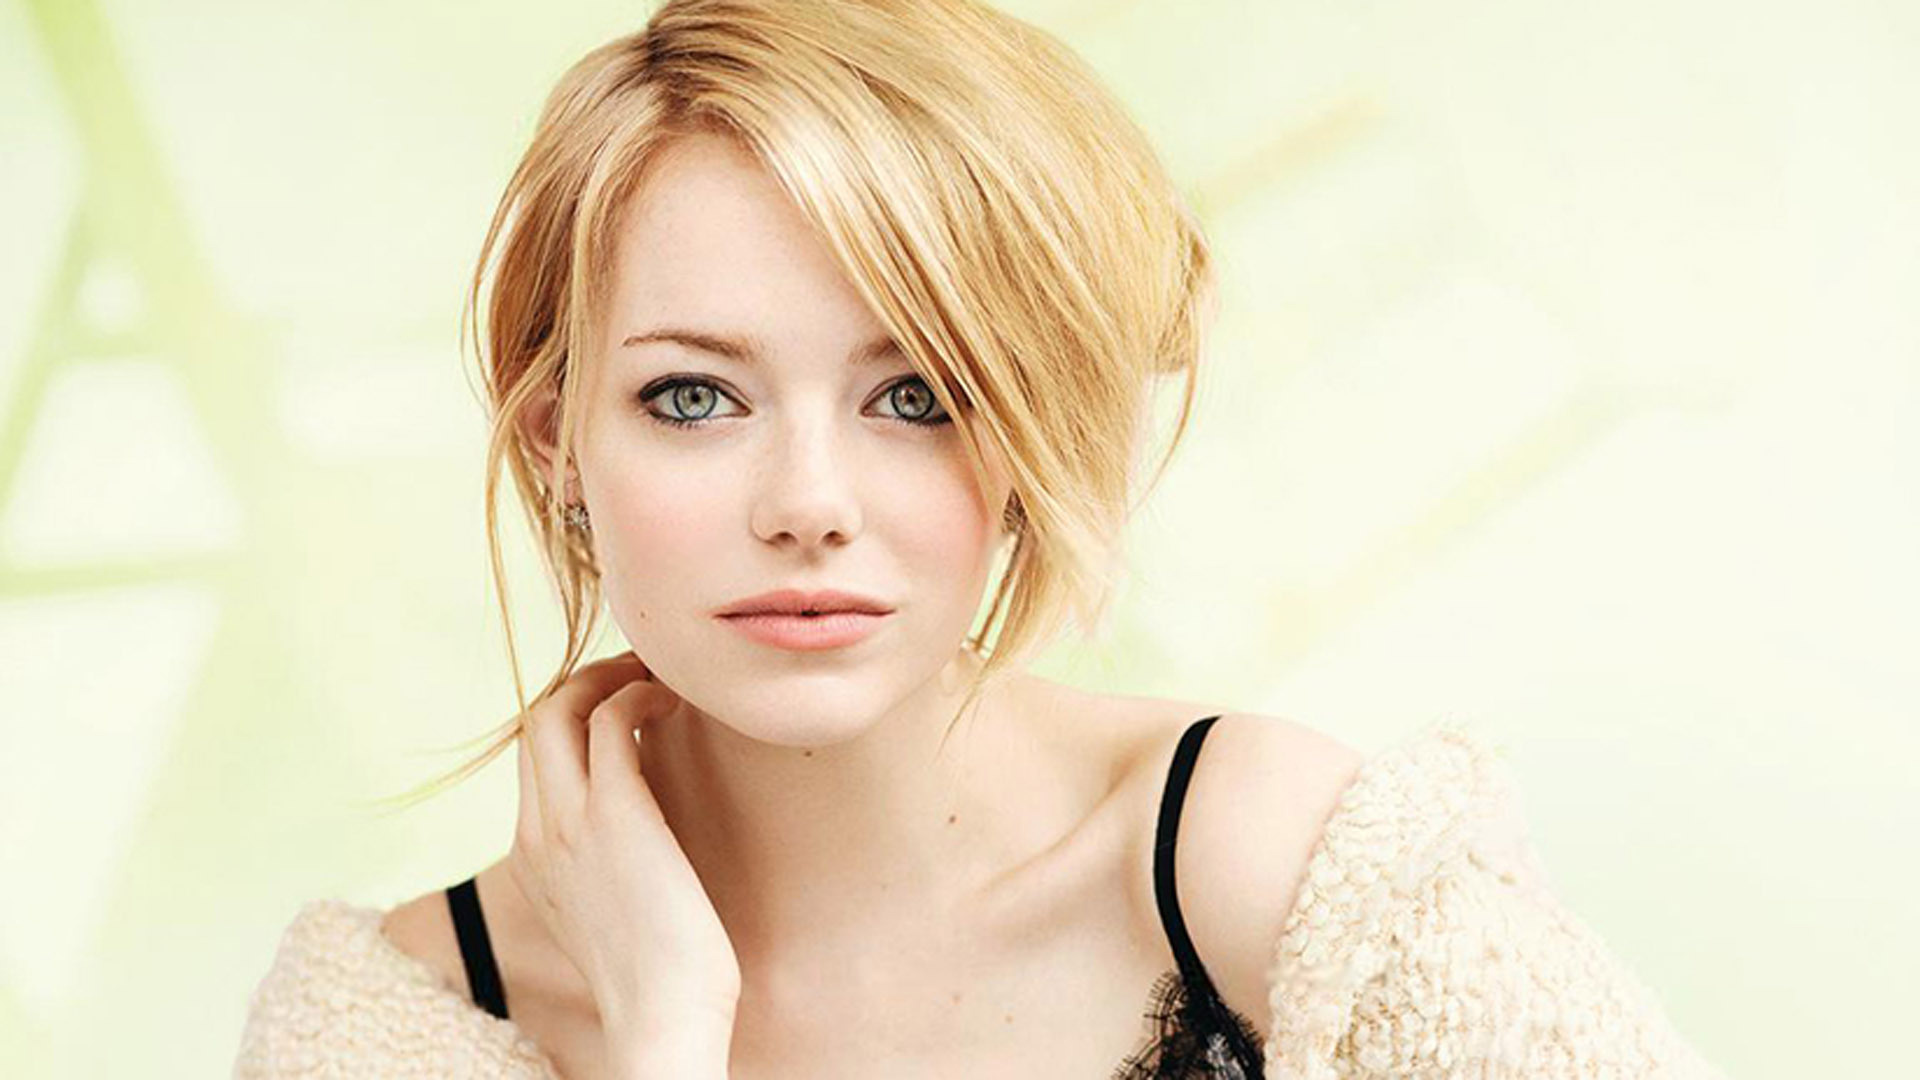 Emma Stone movies, HD wallpapers, Celebrity beauty, Latest images, 1920x1080 Full HD Desktop